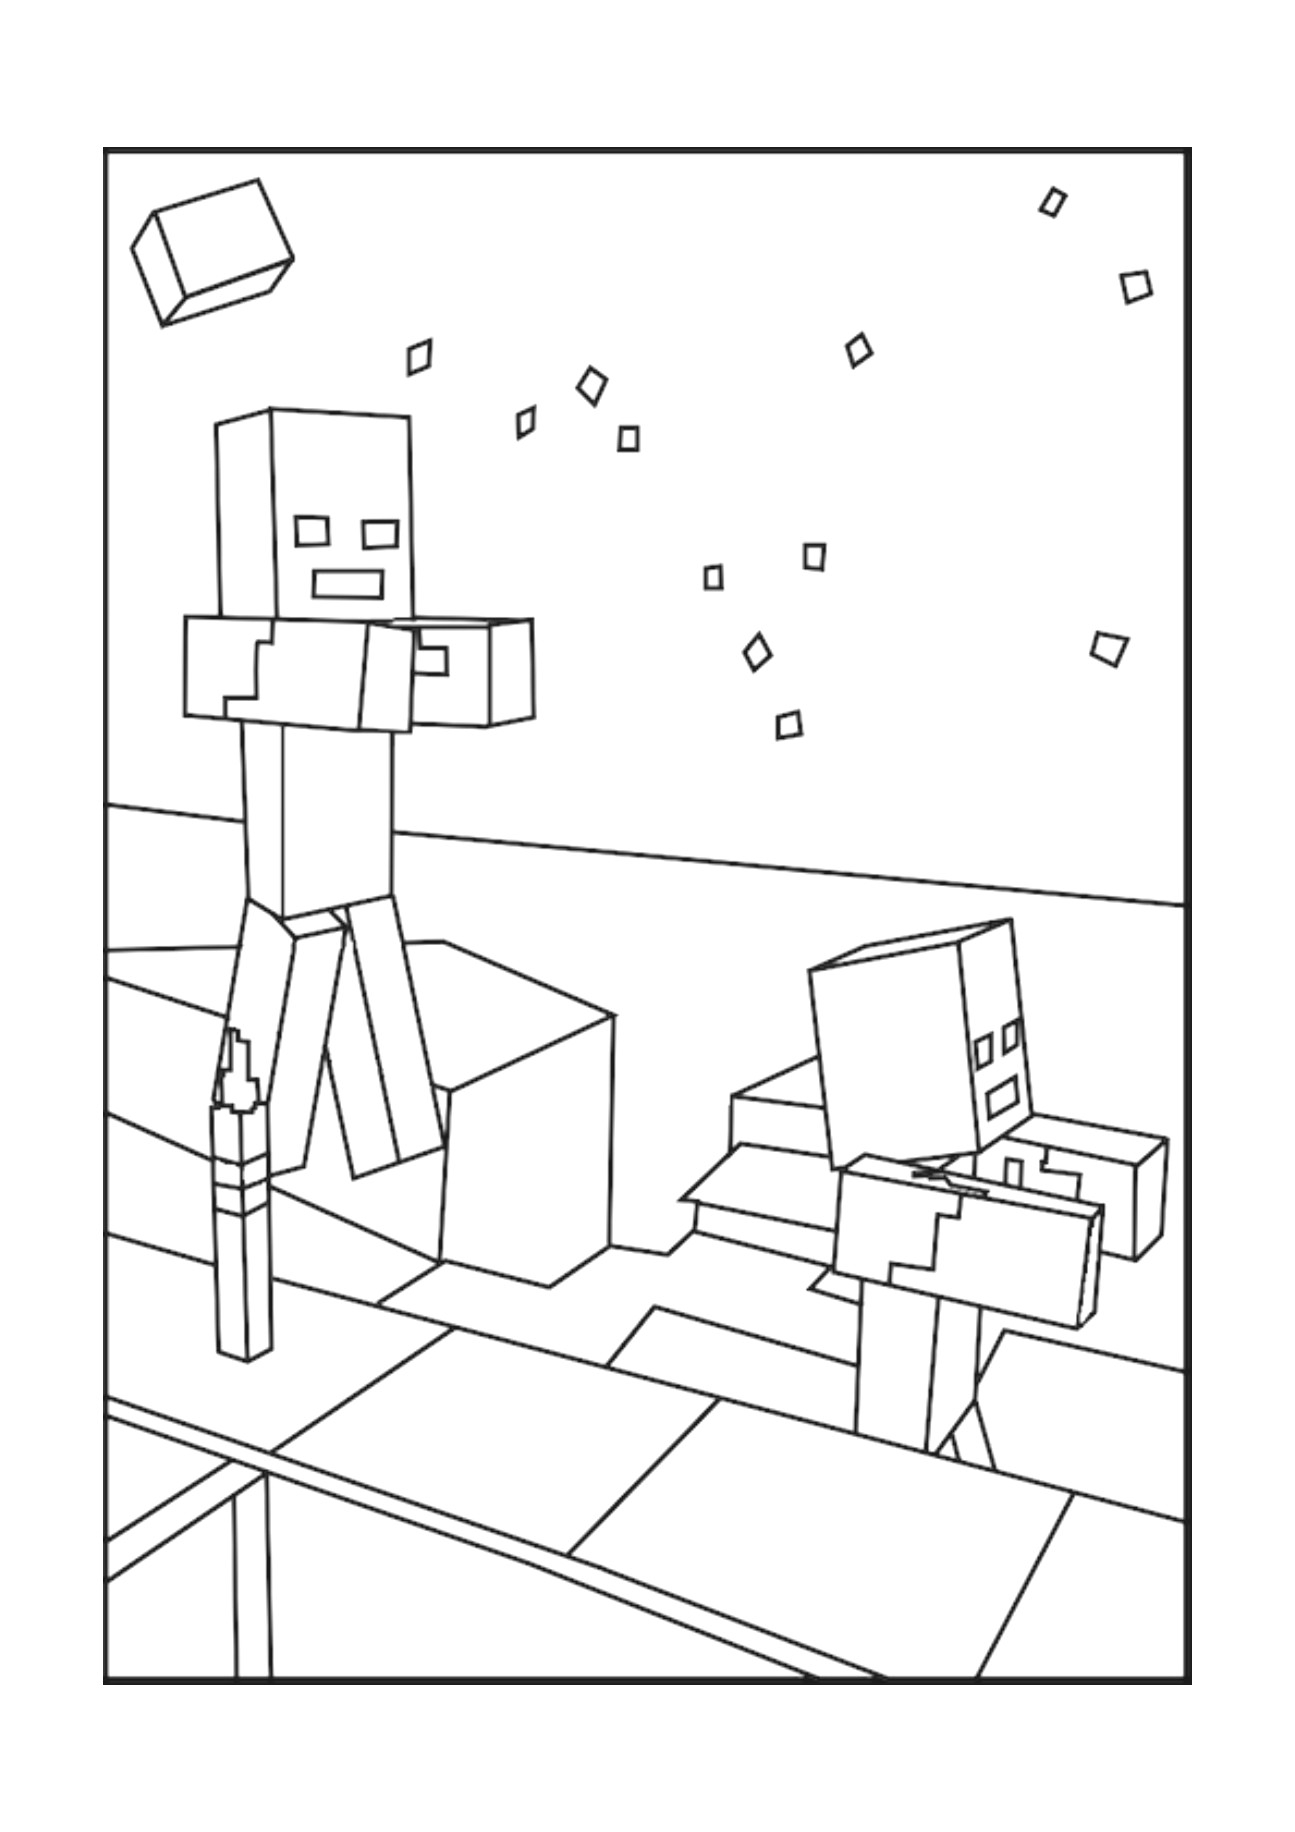 Creative Photo of Herobrine Coloring Pages - vicoms.info